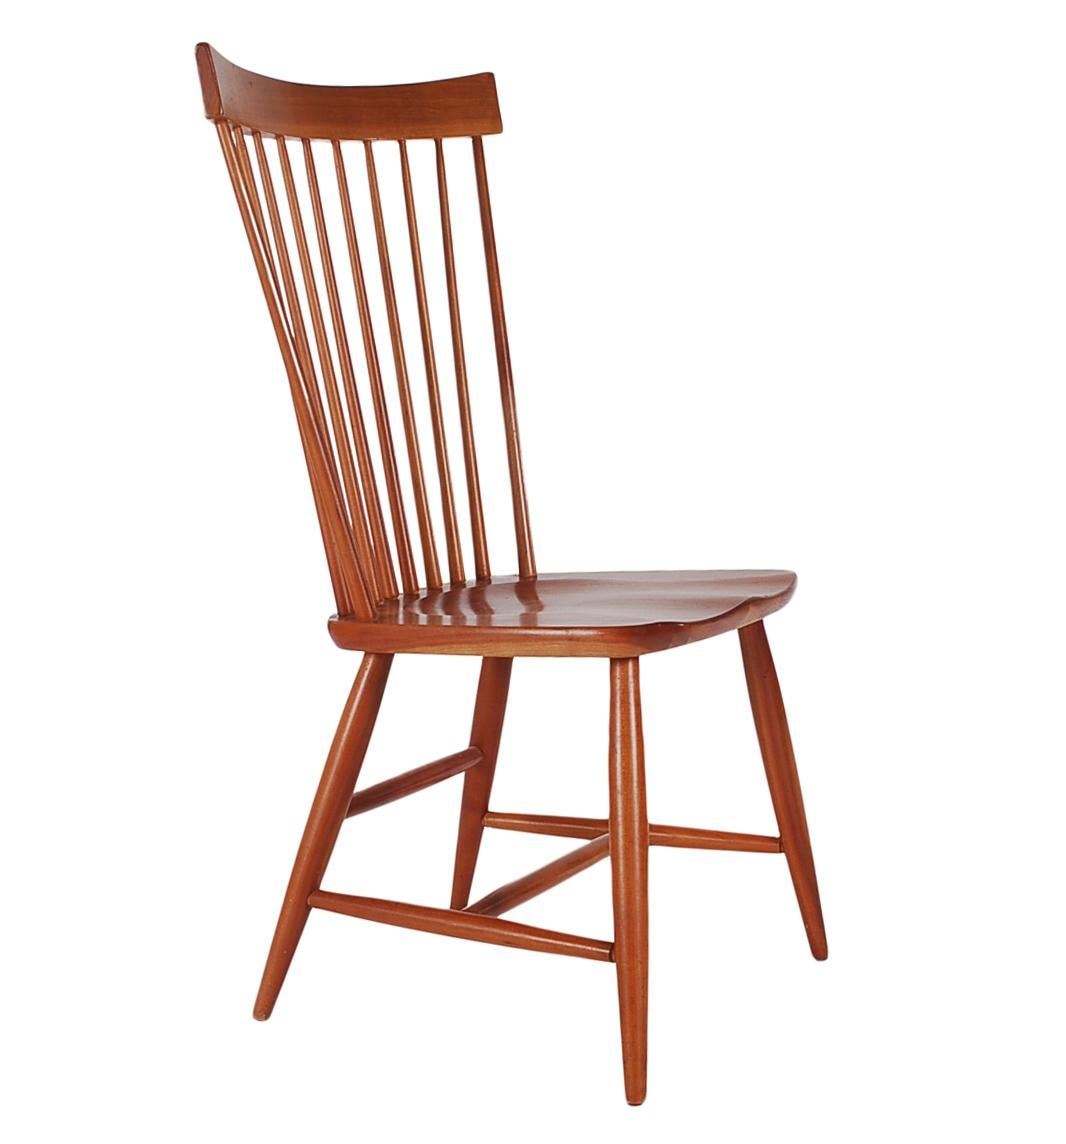 A well-made set of Windsor chairs in solid cherrywood. Great modern design lines, with saddle seats. Set of six as shown, 2 with arms, and 4 side chairs.

In the style of George Nakashima.